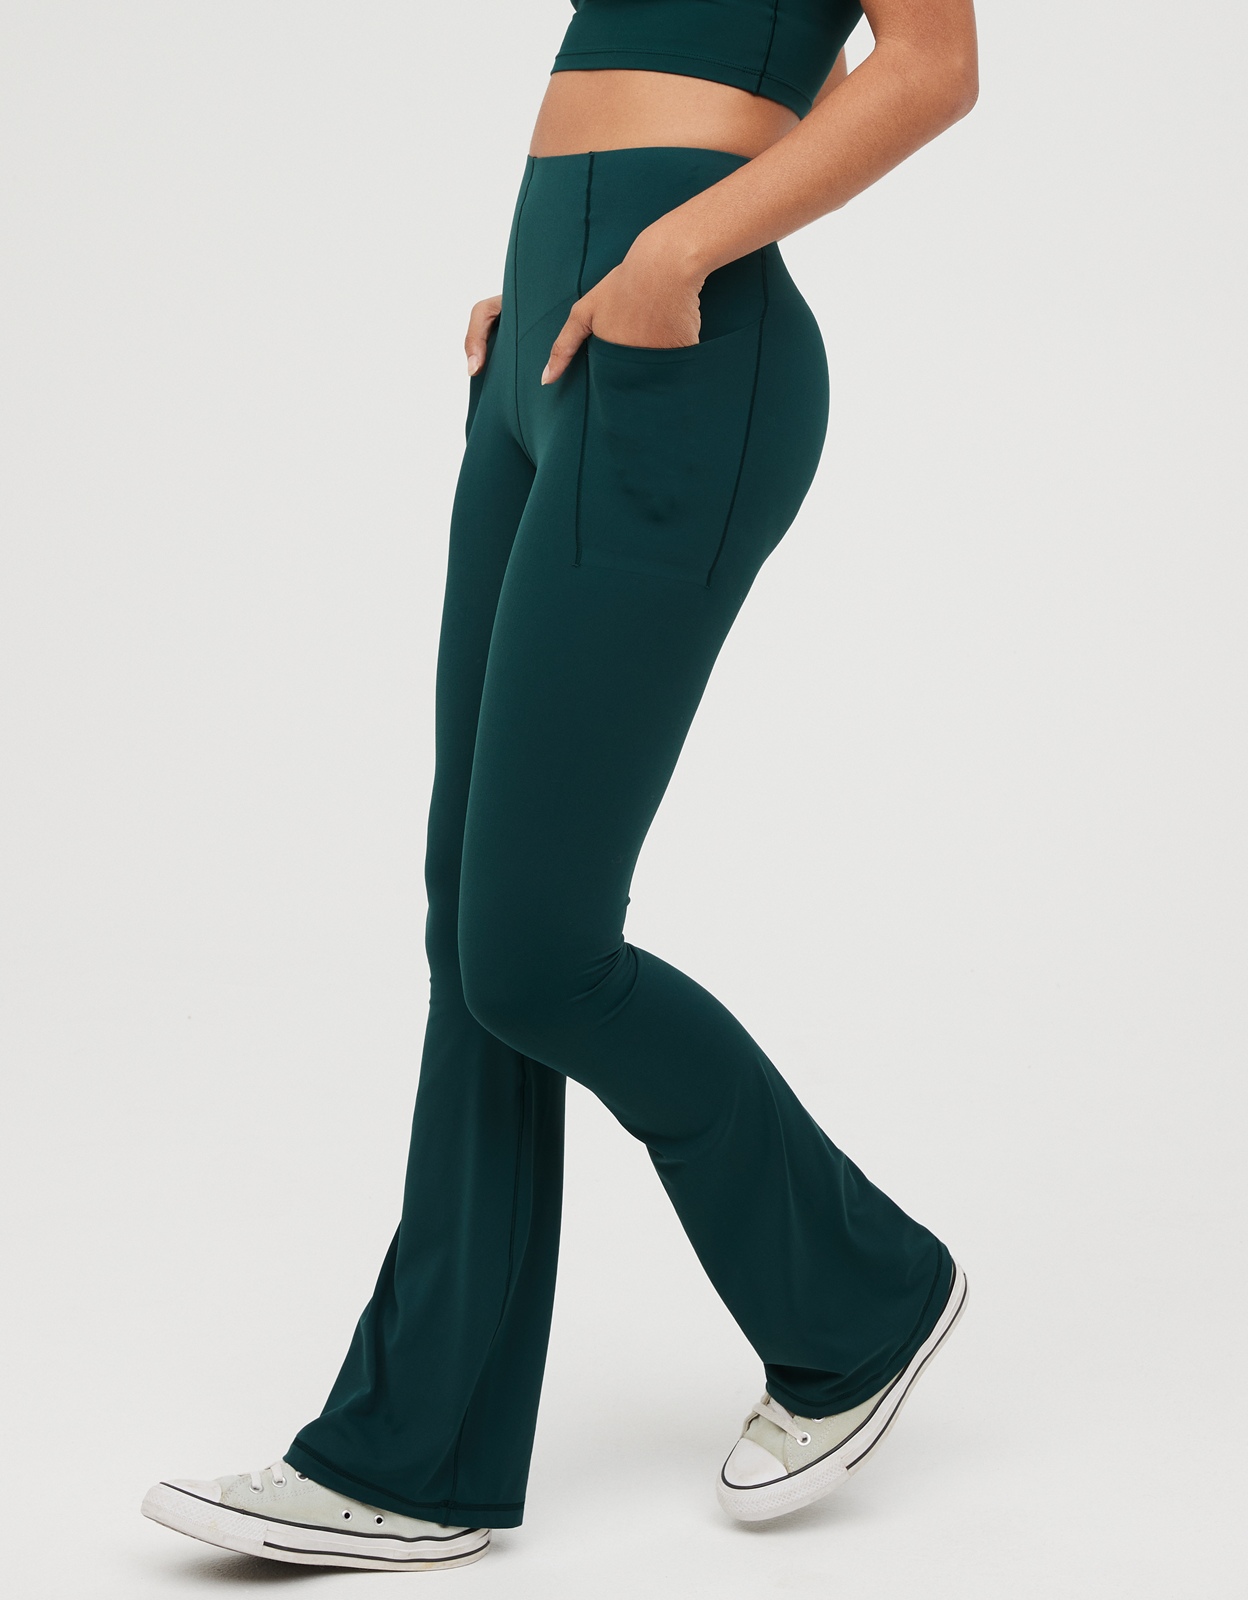 Buy OFFLINE By Aerie Real Me Xtra Hold Up! Pocket Bootcut Legging